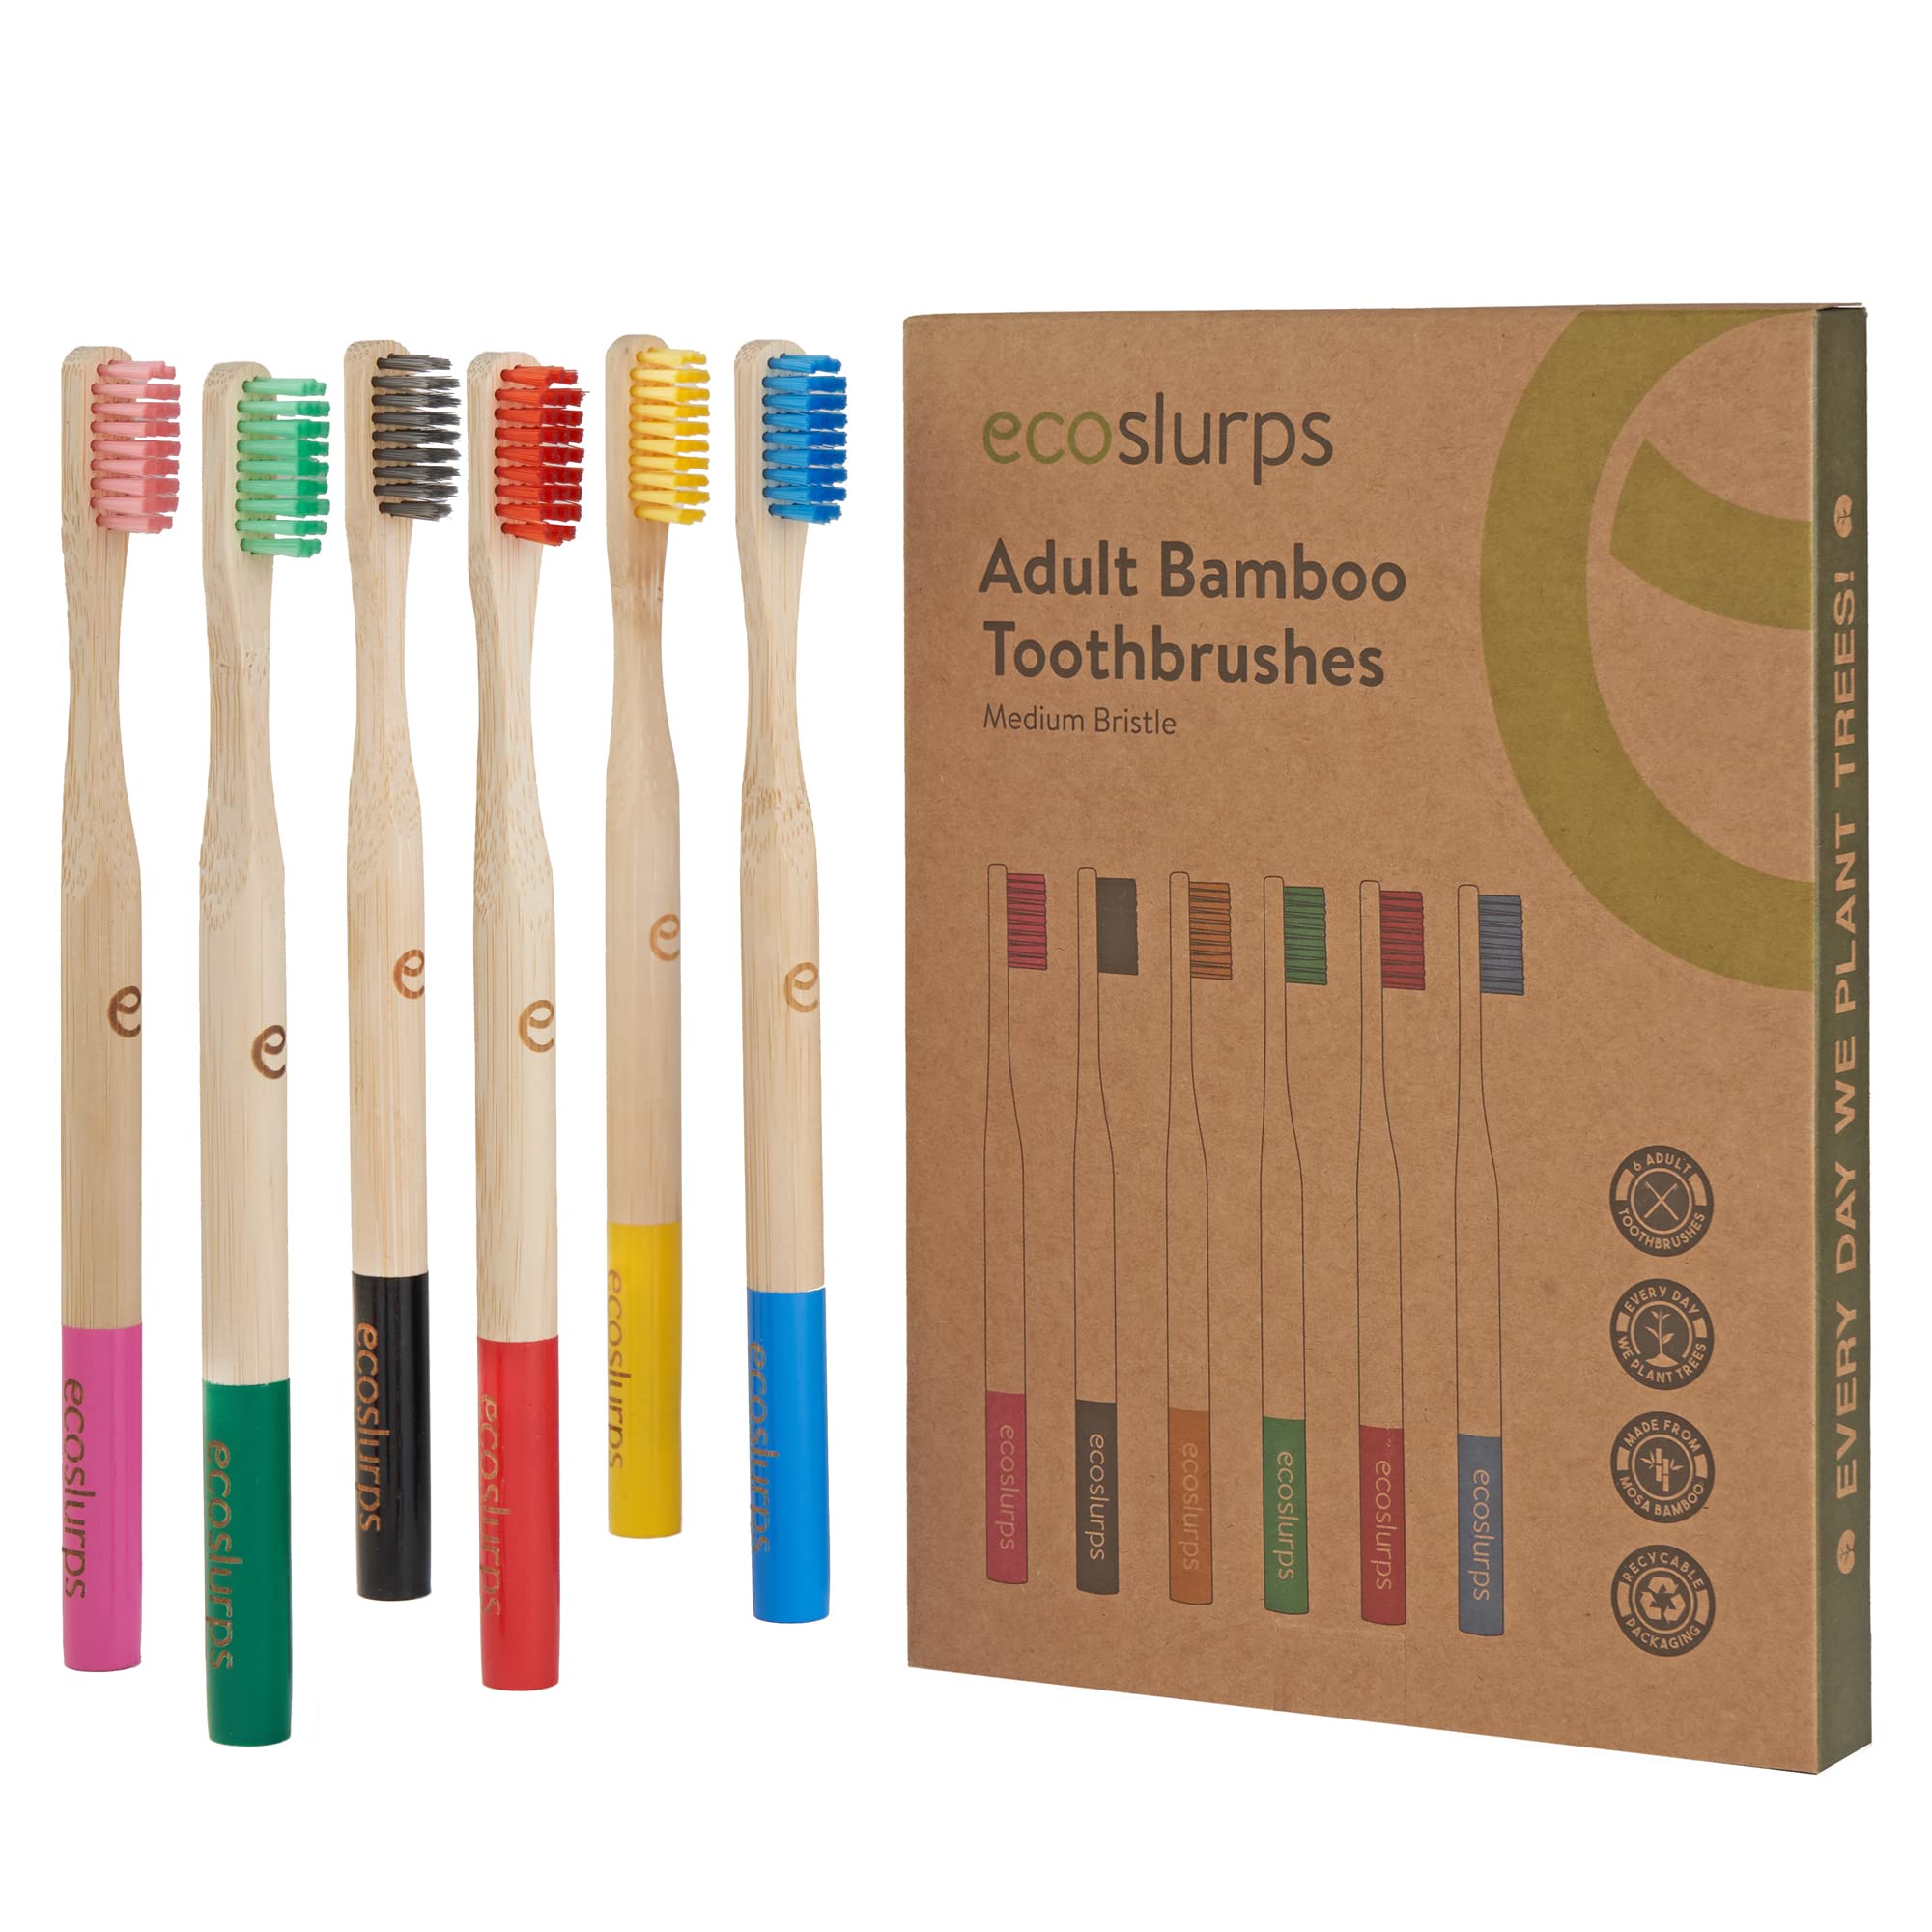 6 Bamboo Toothbrushes Medium Bristles | EcoSlurps | Premium Adult Manual Wooden Toothbrush Family Multipack | Eco Friendly & Plastic Free | Tree Planted with Each Sale (6, Multicolour)